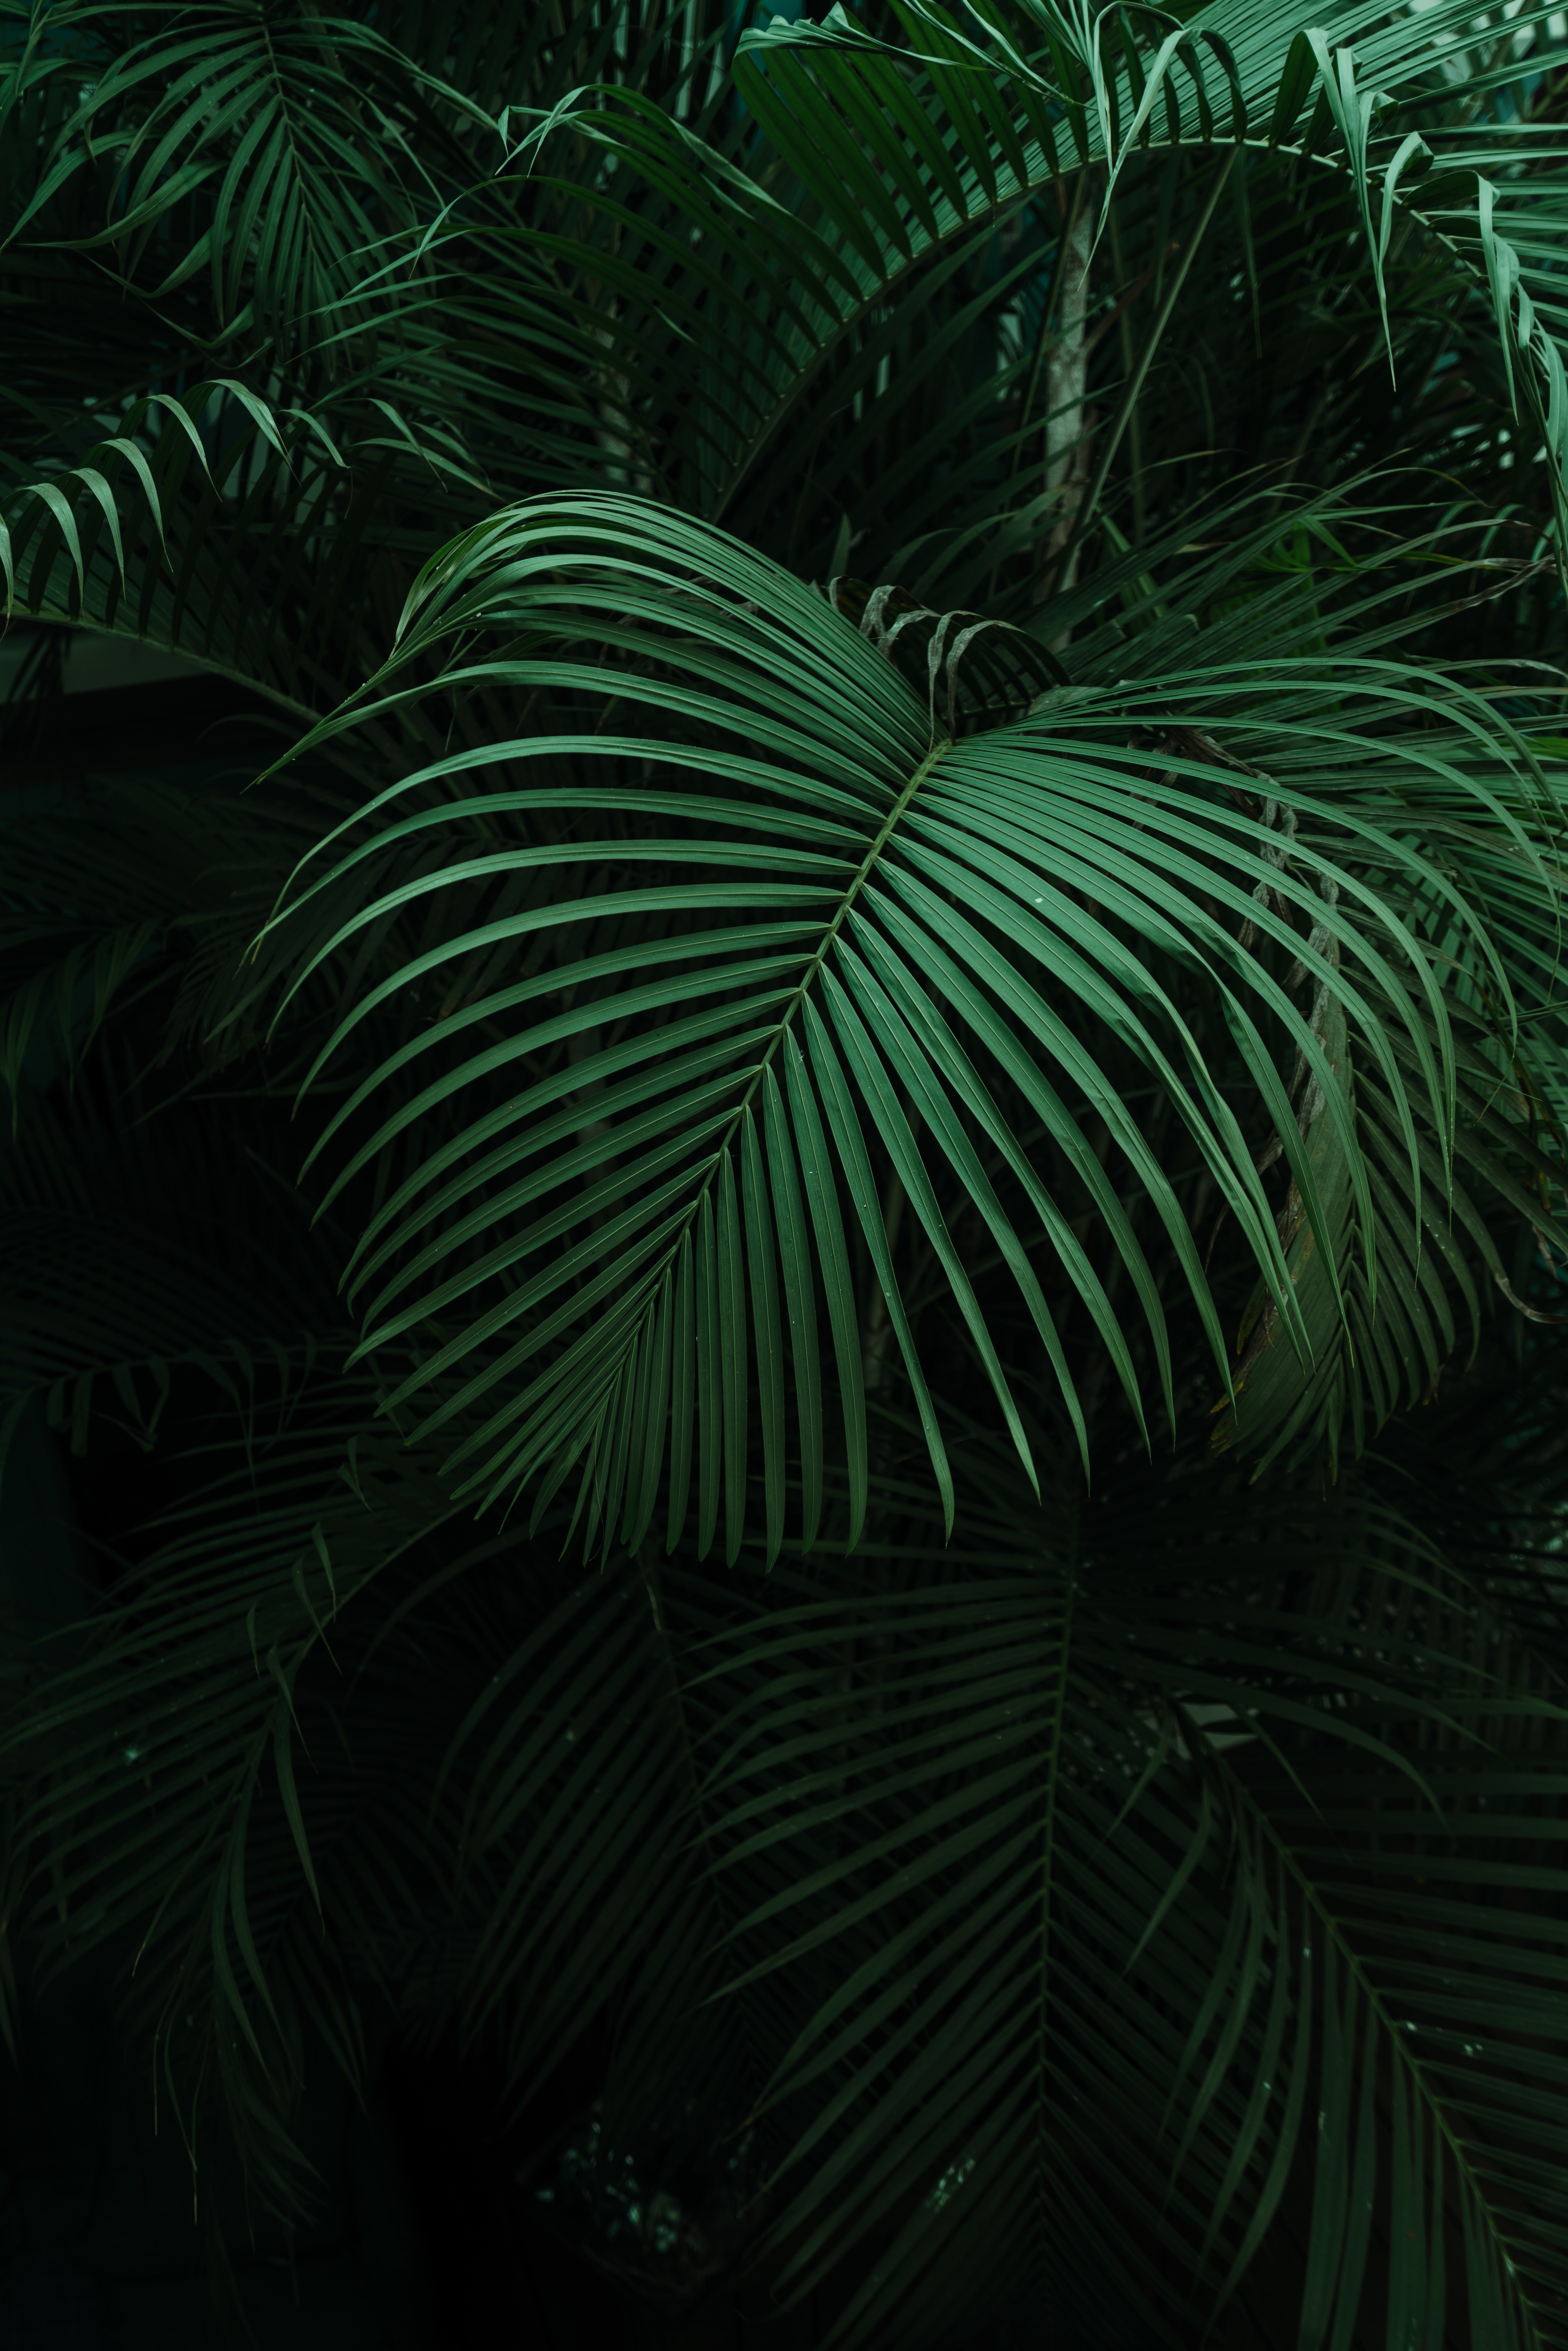 Mobile wallpaper: Palm, Leaves, Dark, 157258 download the picture for free.